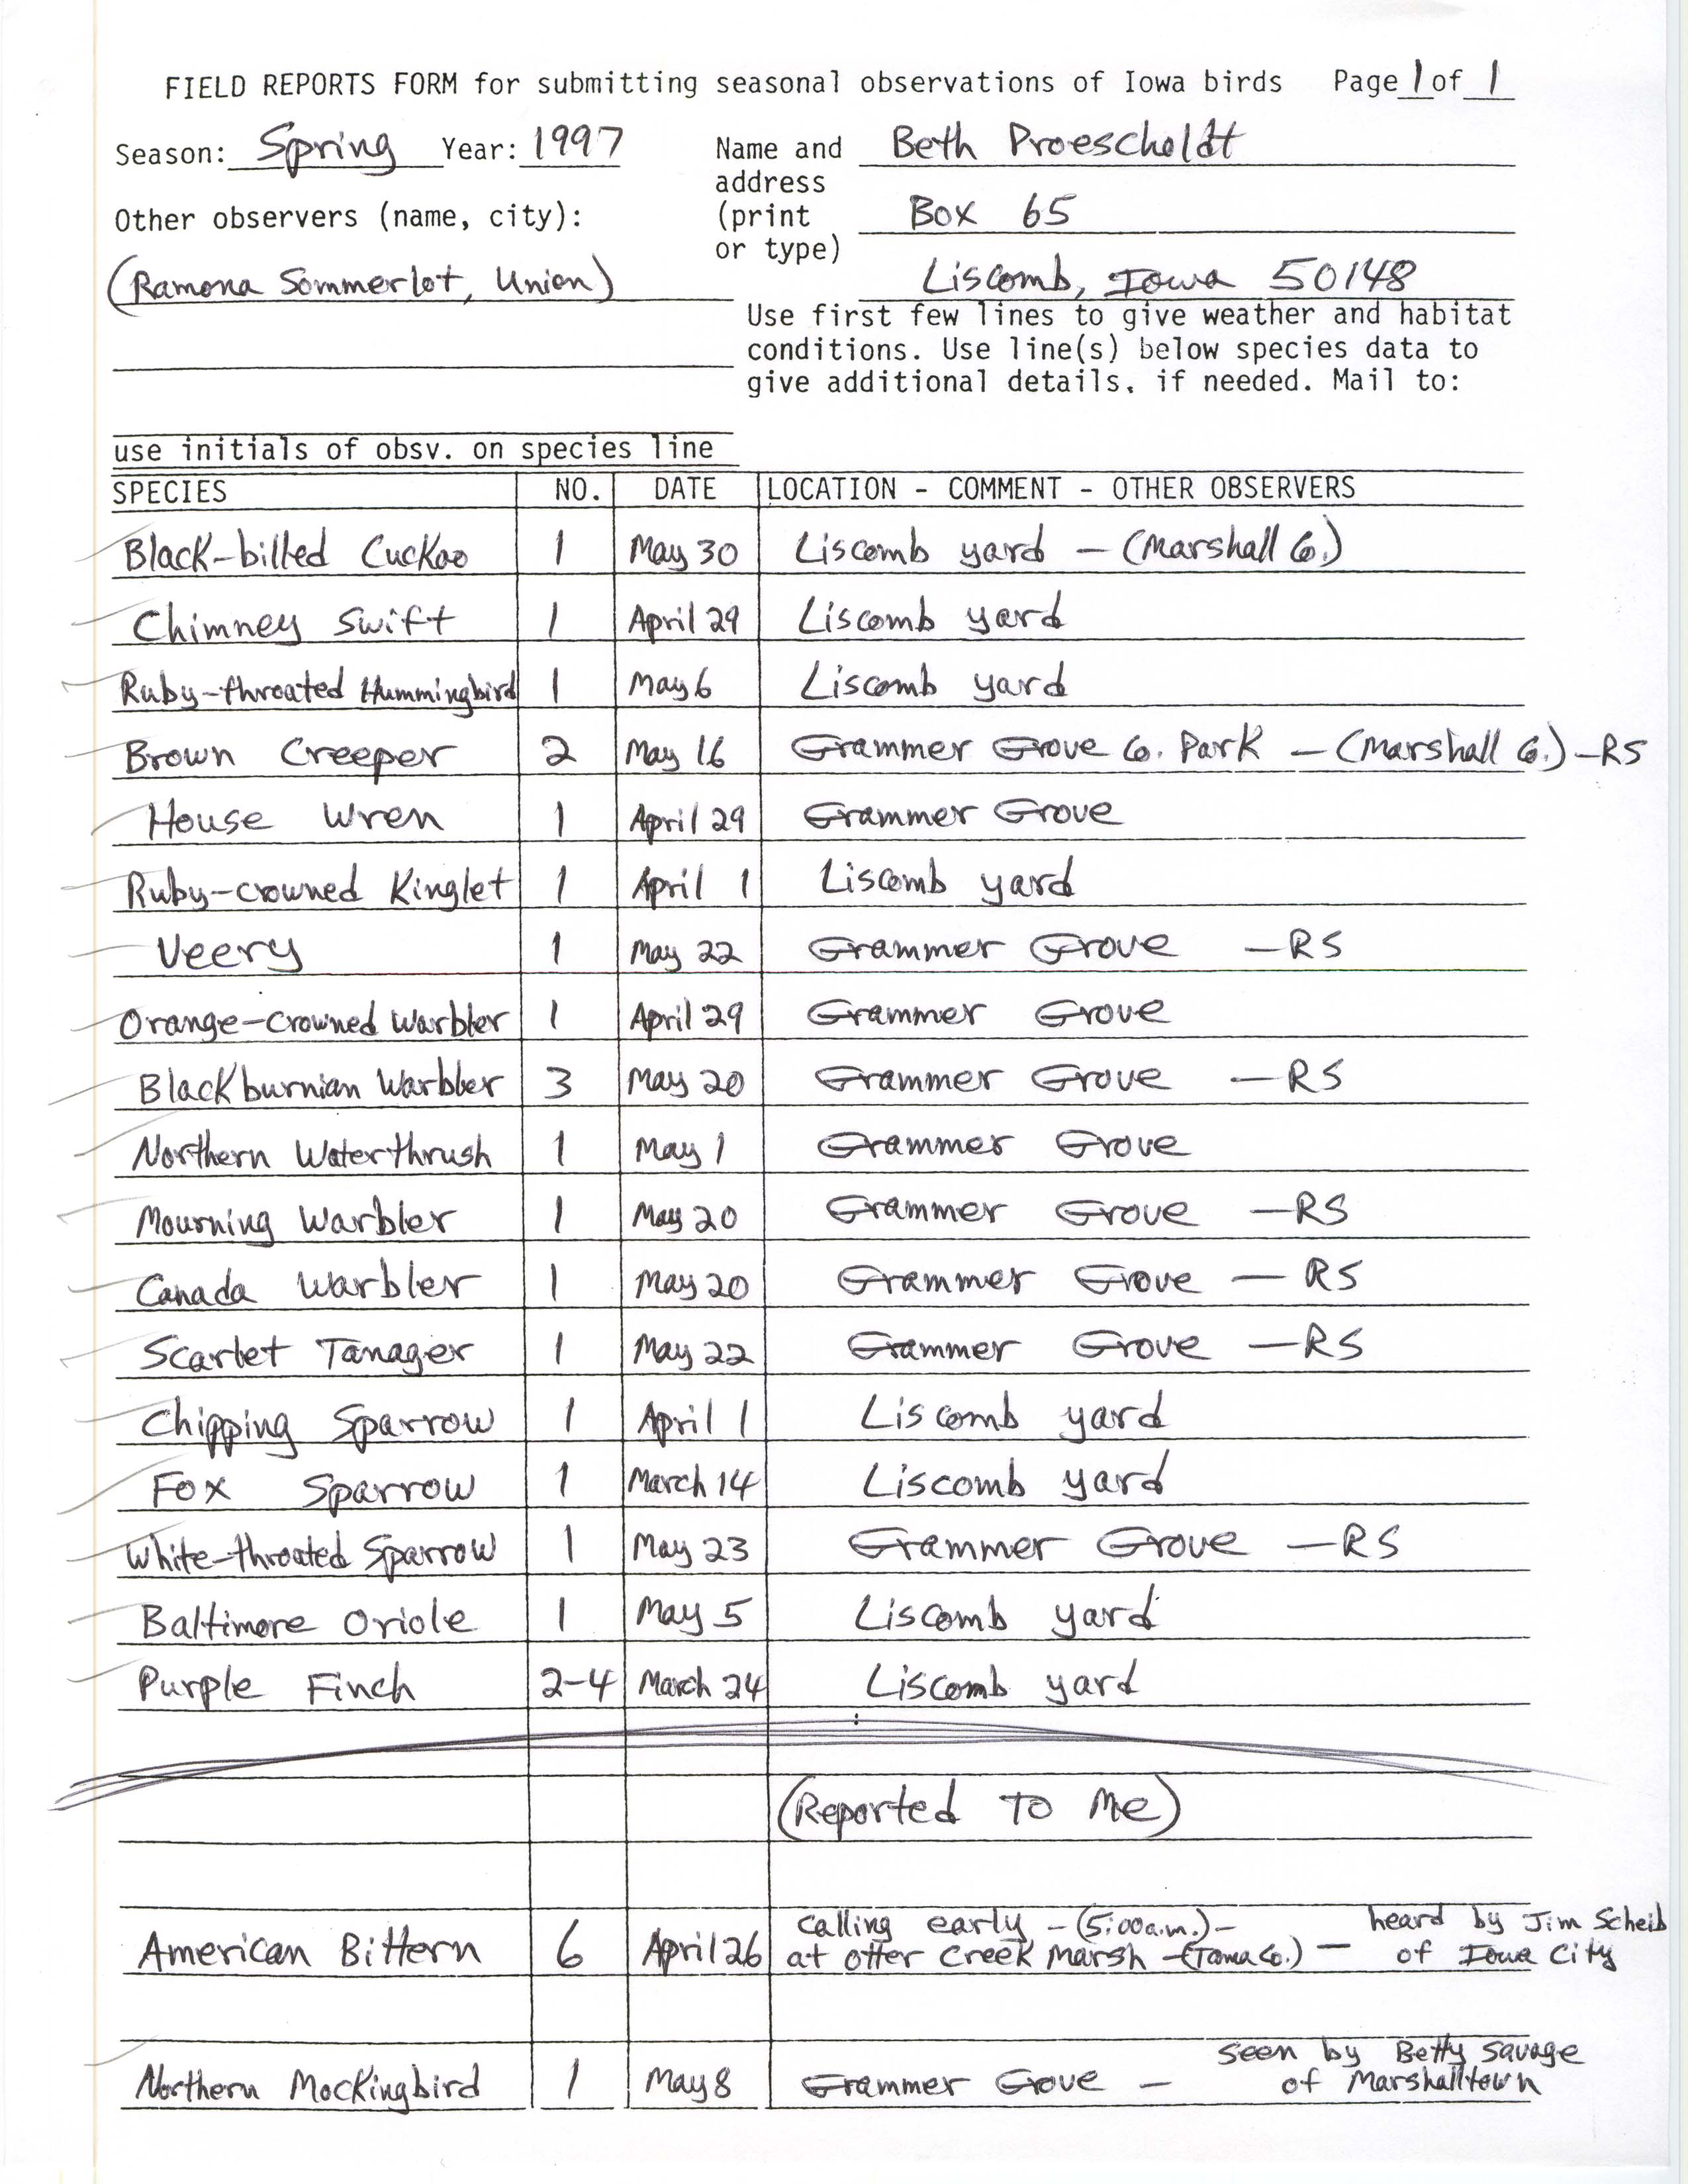 Field reports form for submitting seasonal observations of Iowa birds, Beth Proescholdt, spring 1997